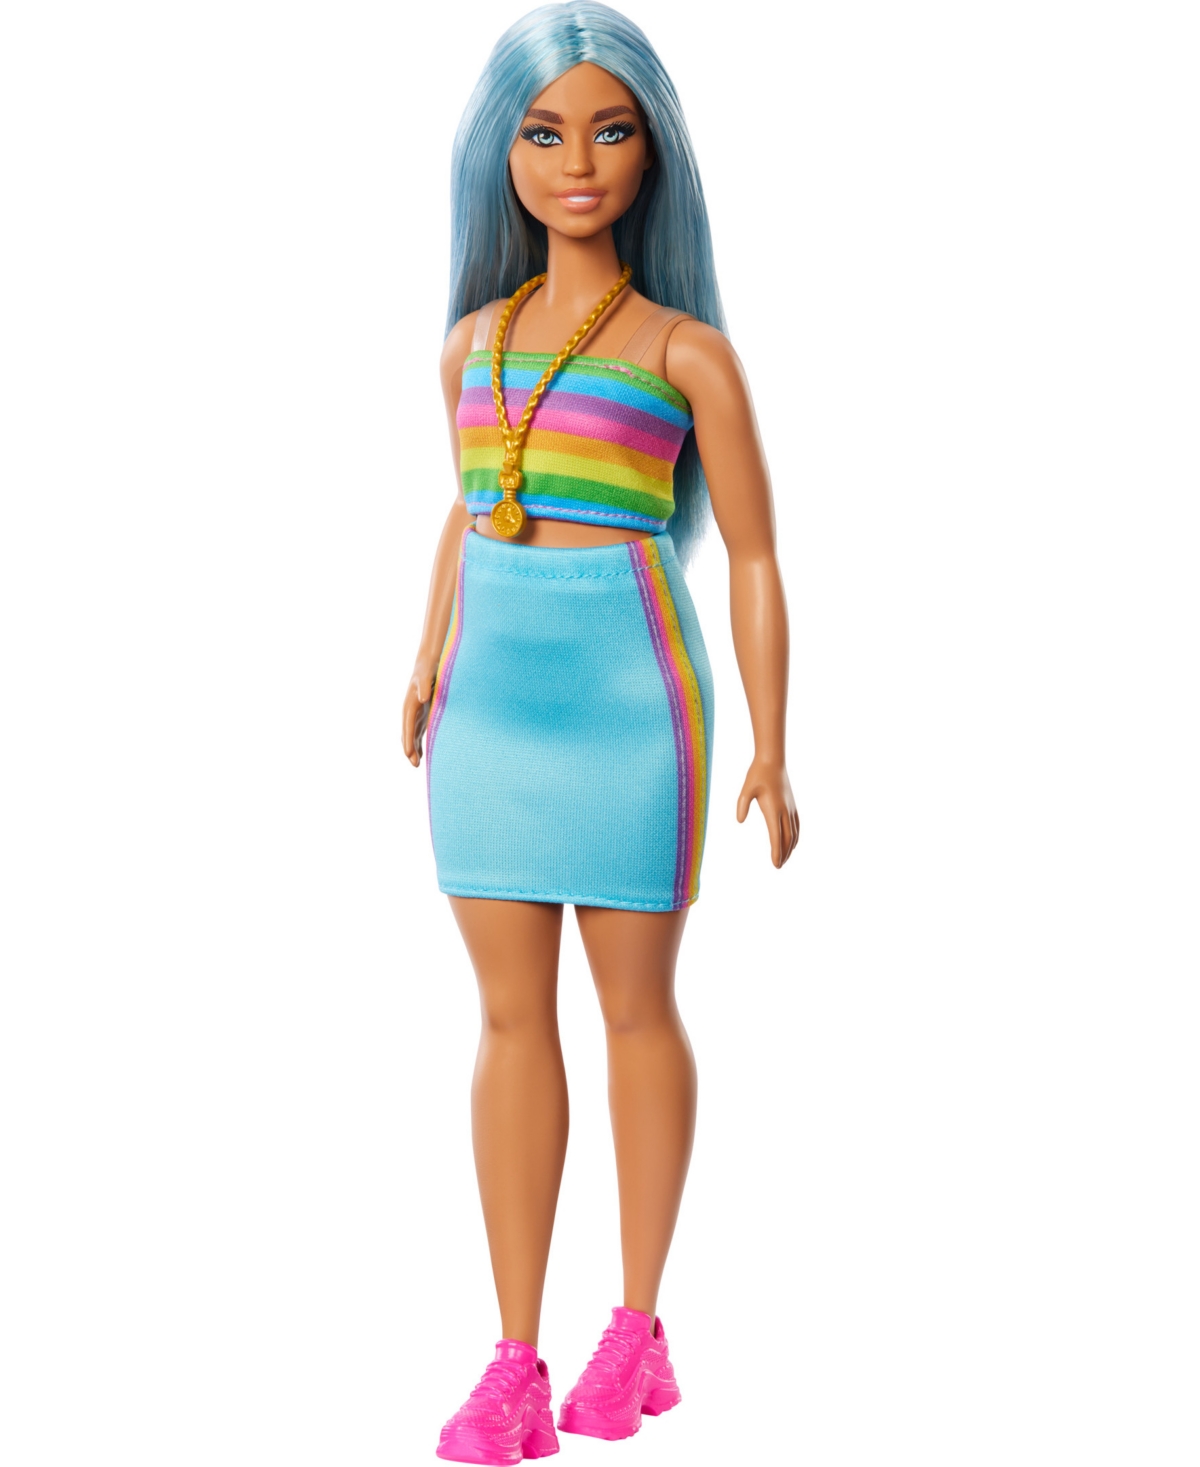 Shop Barbie Fashionistas Doll 218 With Blue Hair, Rainbow Top And Teal Skirt, 65th Anniversary In Multi